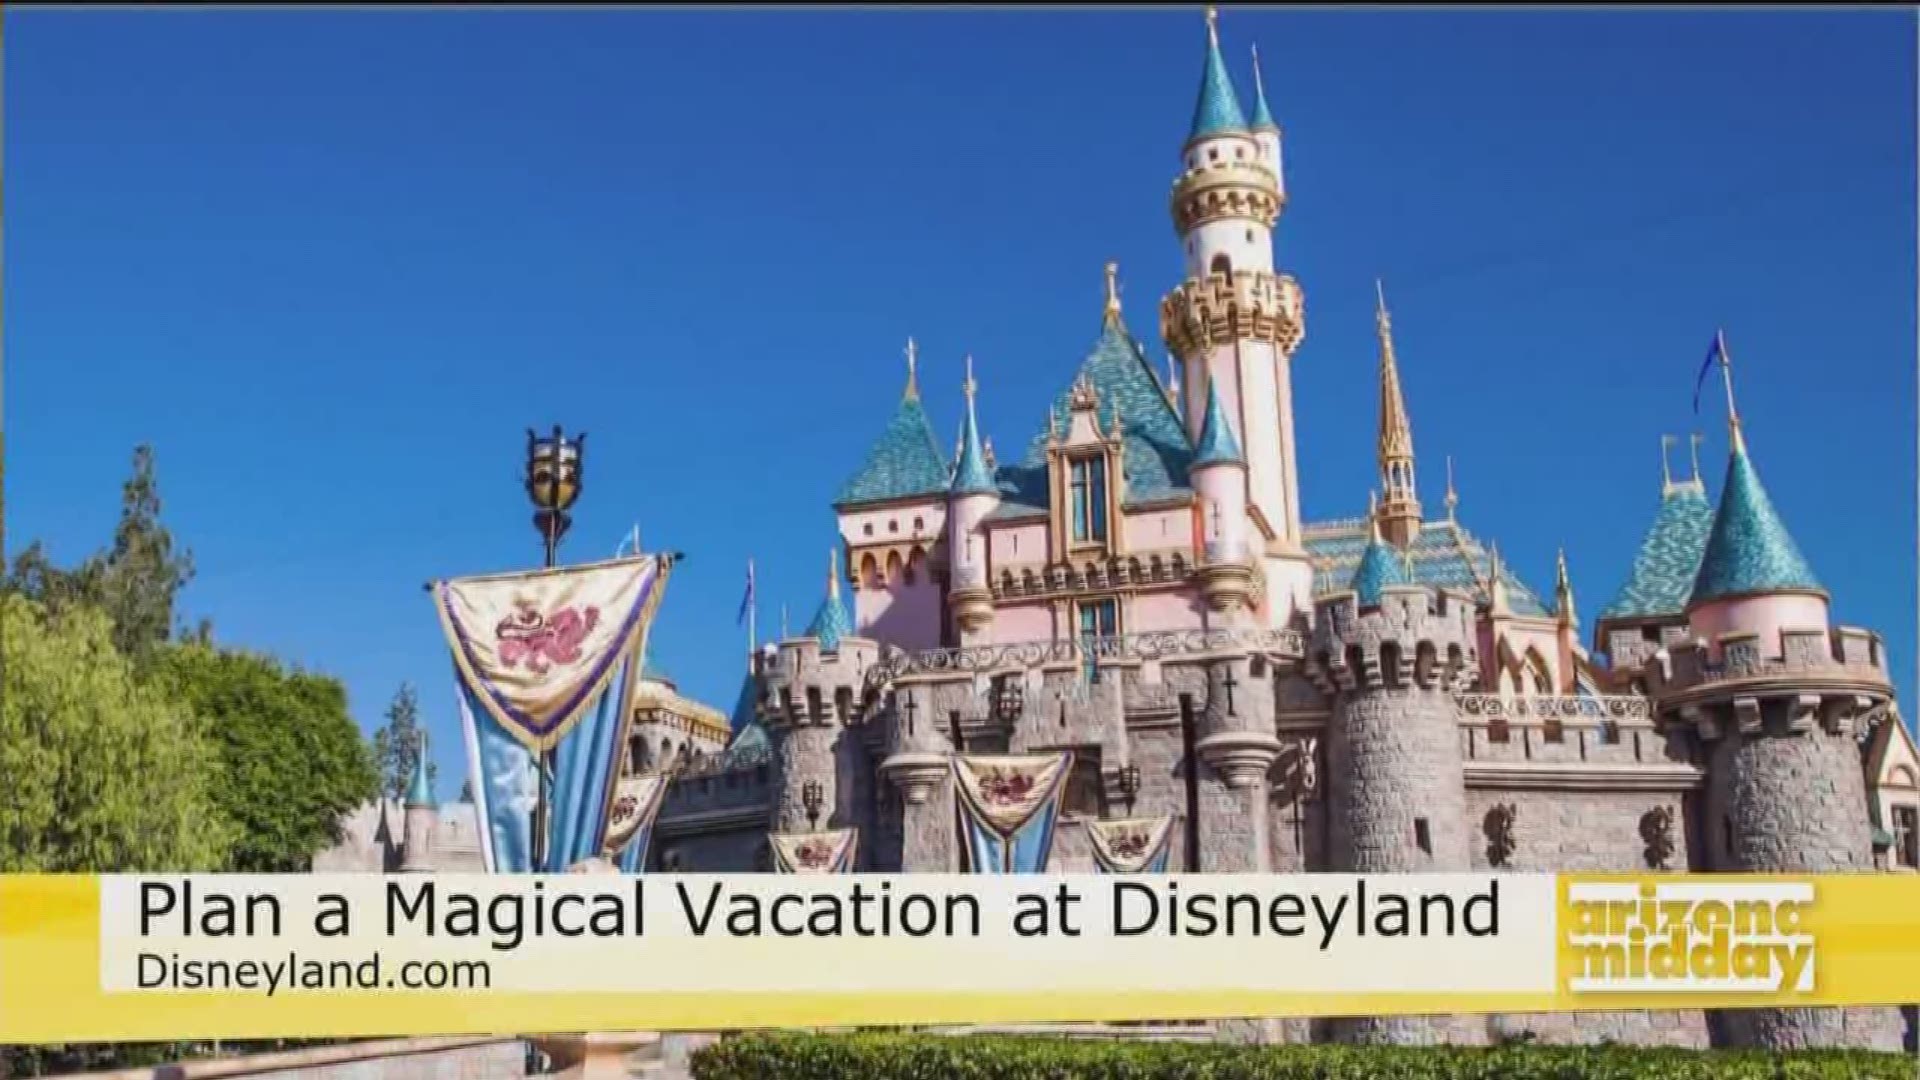 Sleeping Beauty remodeled her castle! Plus, Alexa Garcia with Disneyland Resort gives us the scoop on the newest ways to explore Disneyland - from the fast pass app to mobile food orders!